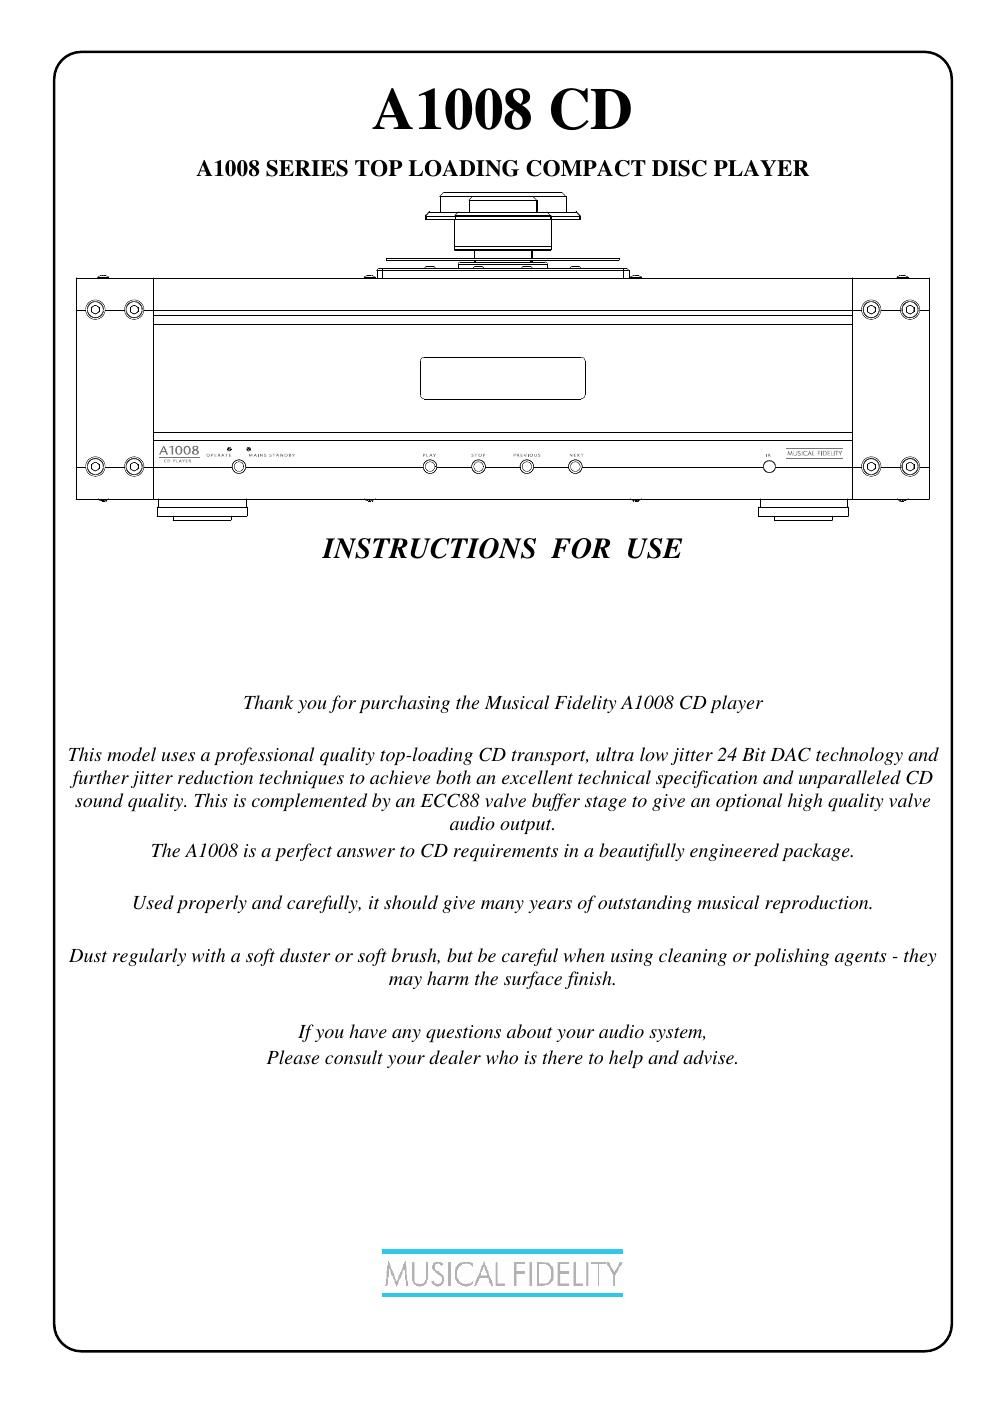 musical fidelity a 1008 cd player owners manual